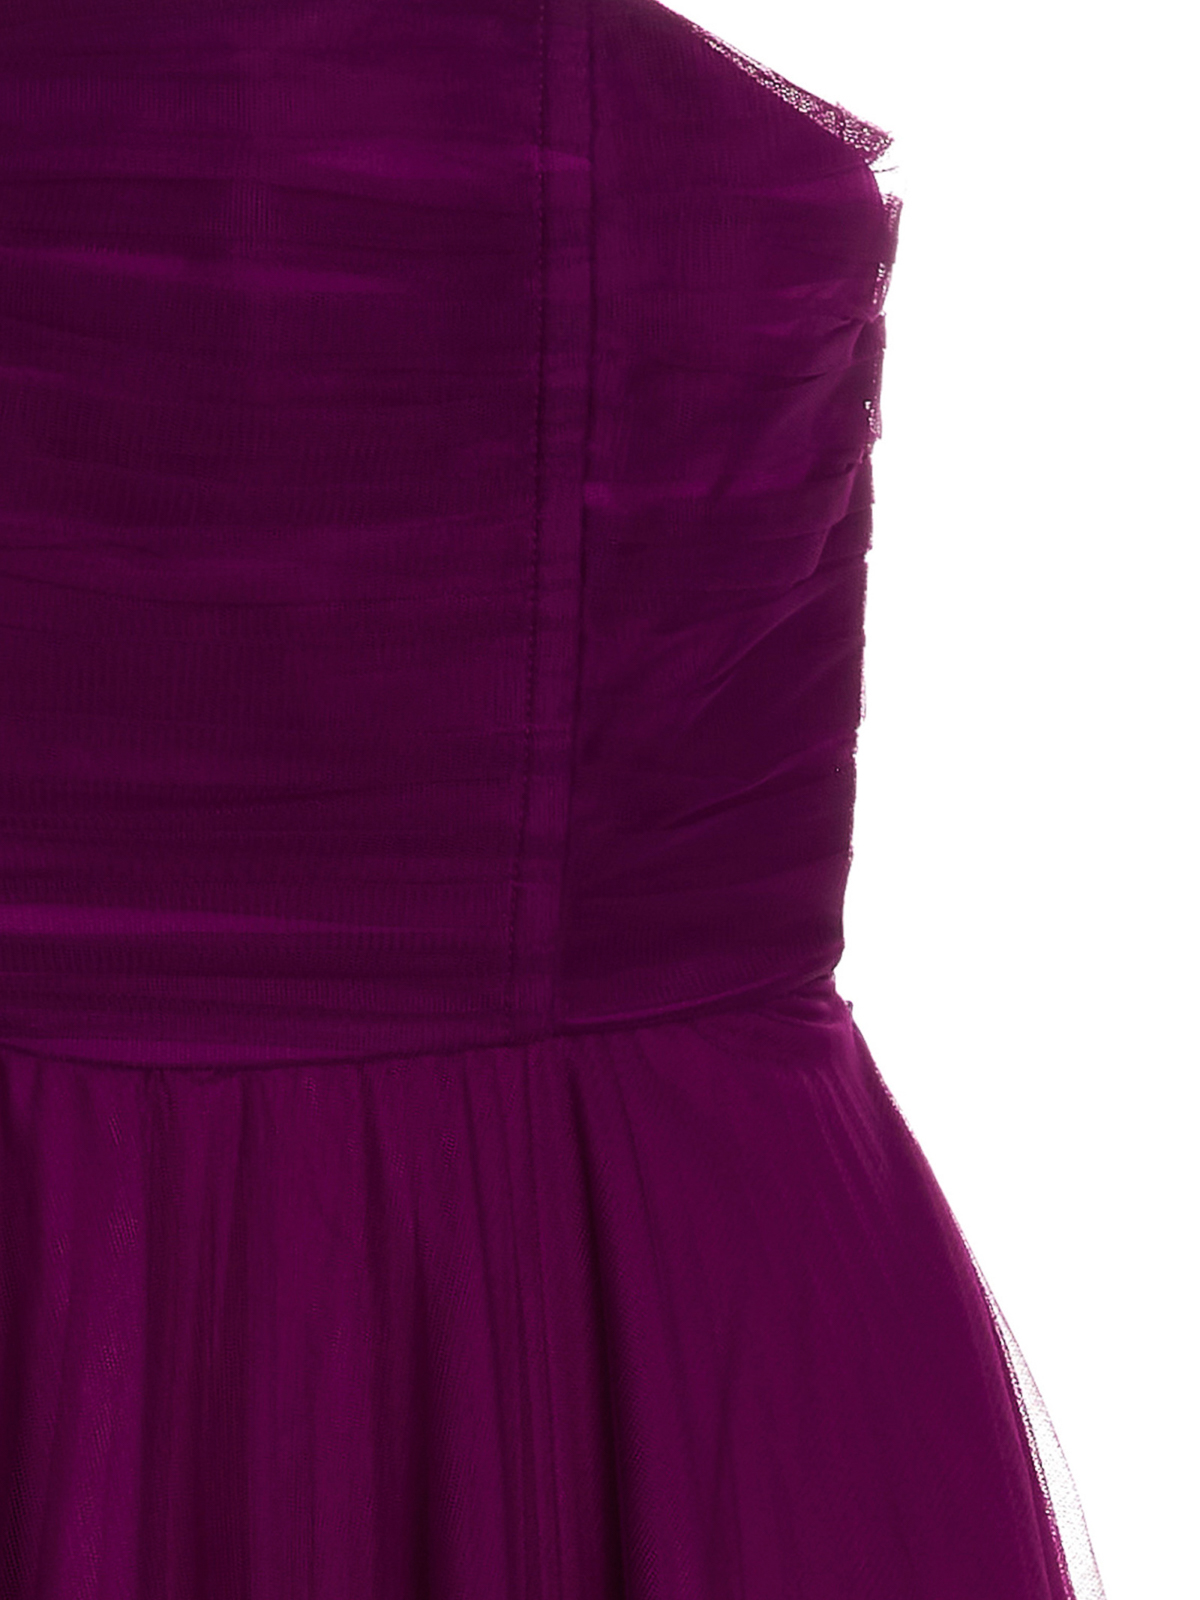 Shop 19:13 Dresscode Long Tulle Dress With Pleated Skirt In Purple